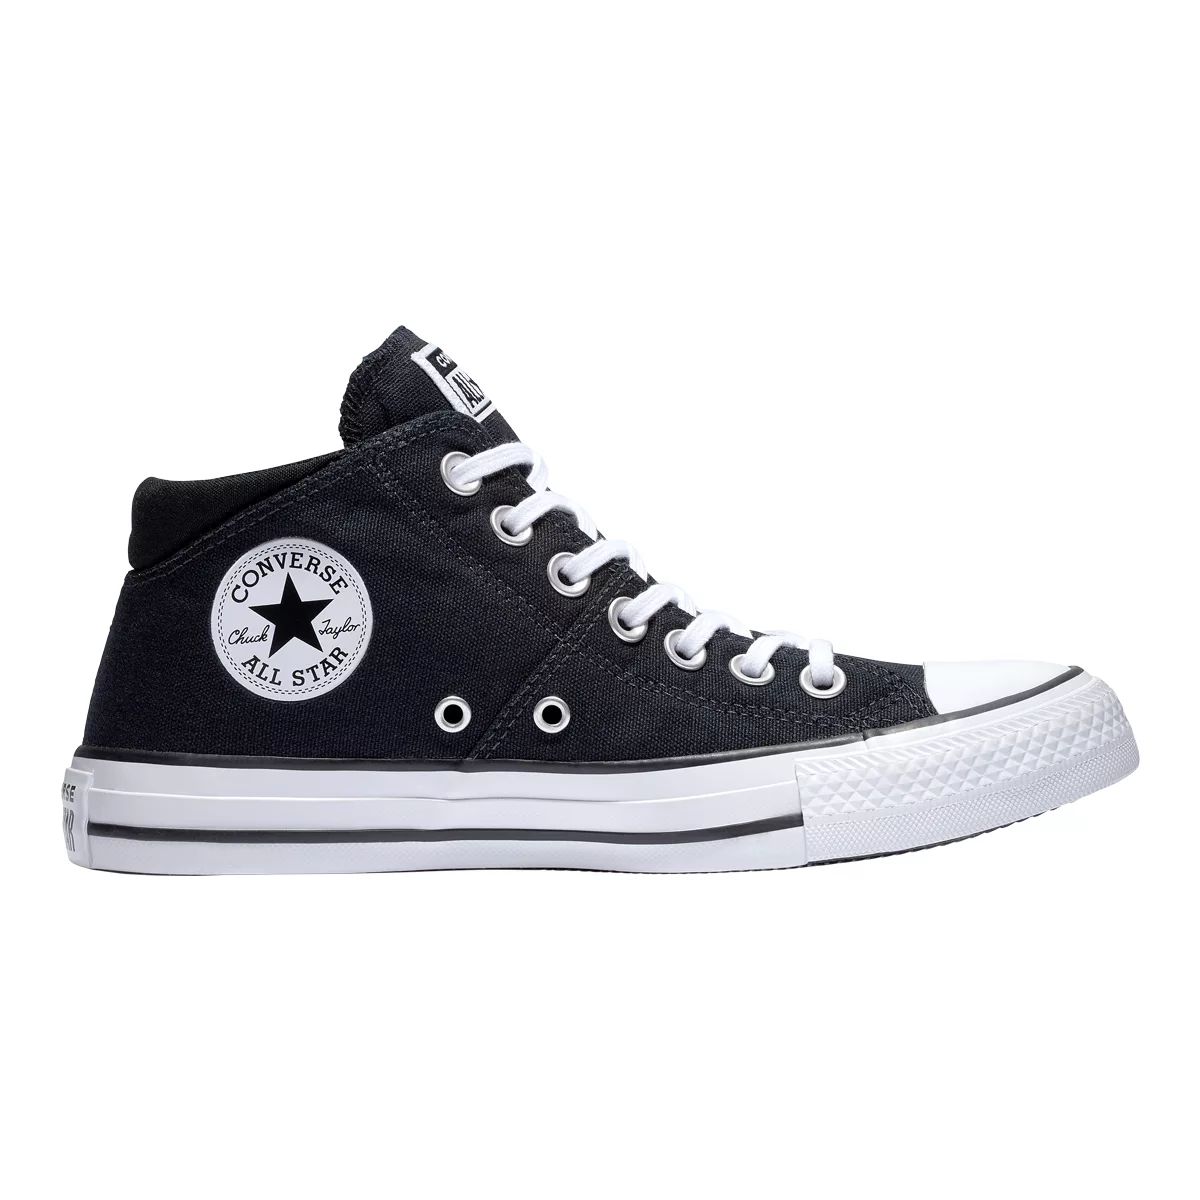 Image of Converse Women's Chuck Taylor All Star Madison Shoes Sneakers Mid Top Canvas Cushioned